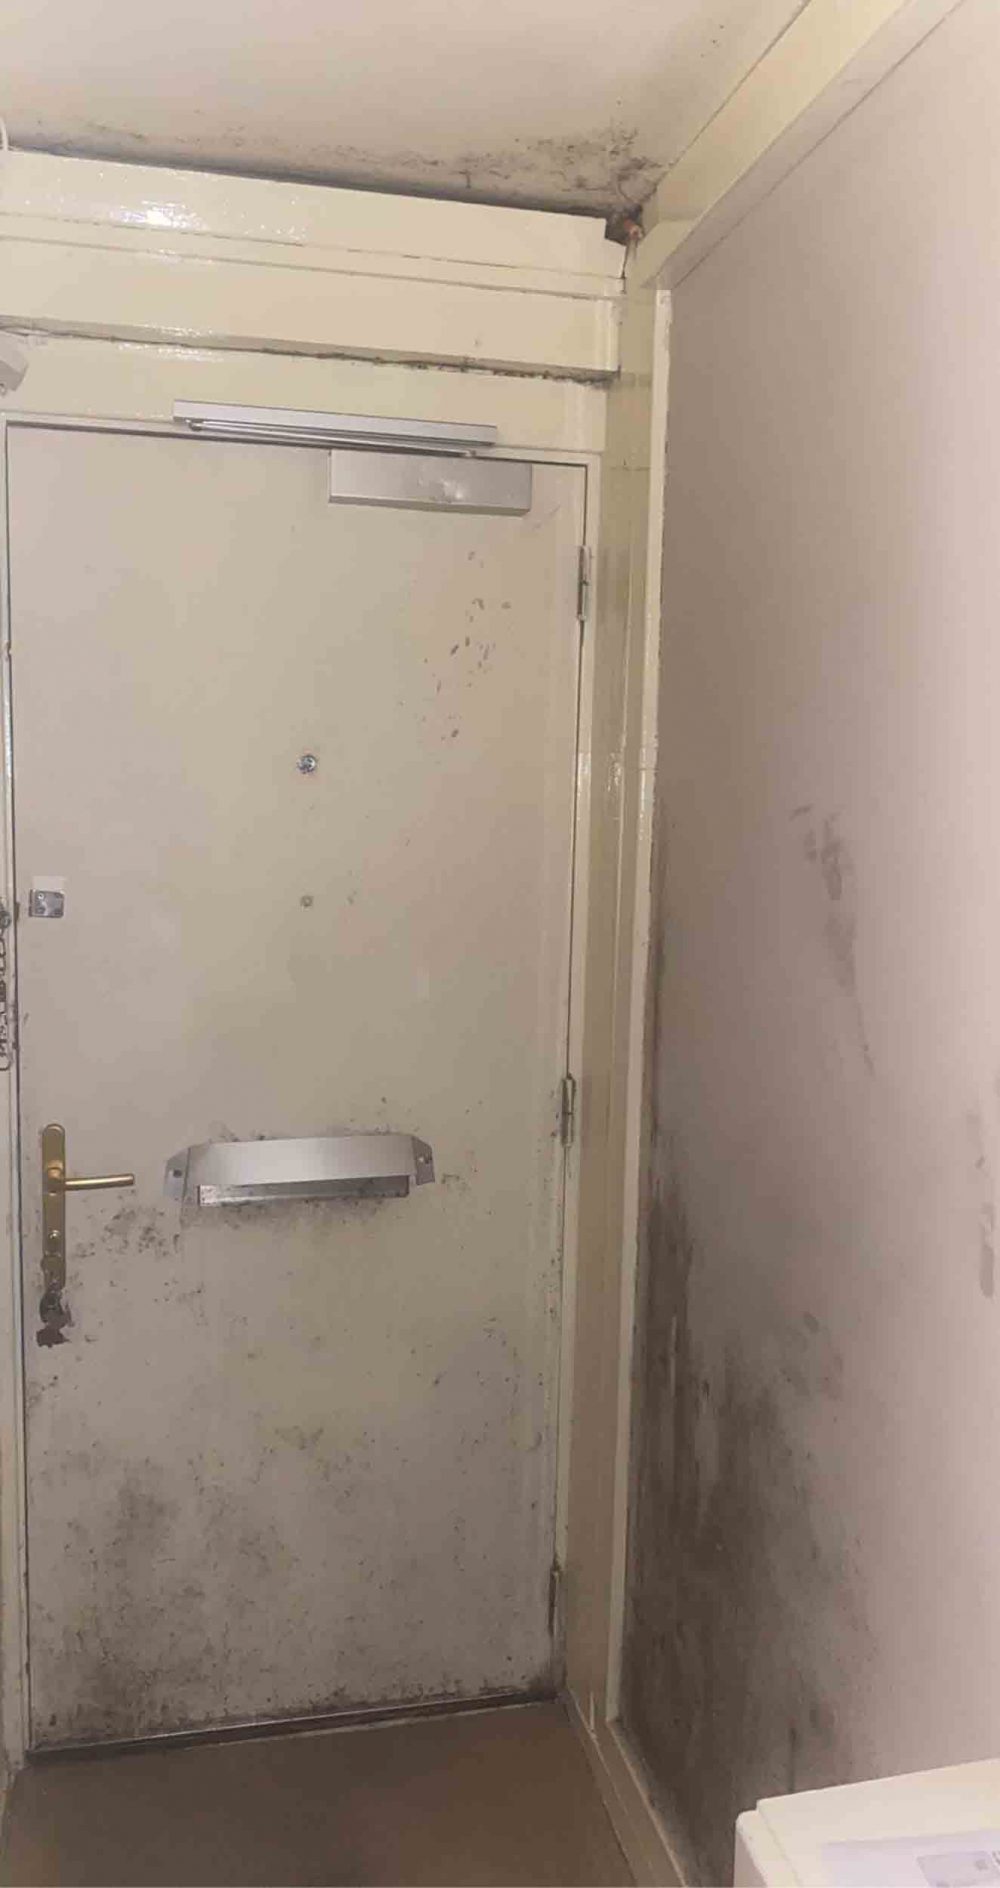 Mould infested door | Scottish News